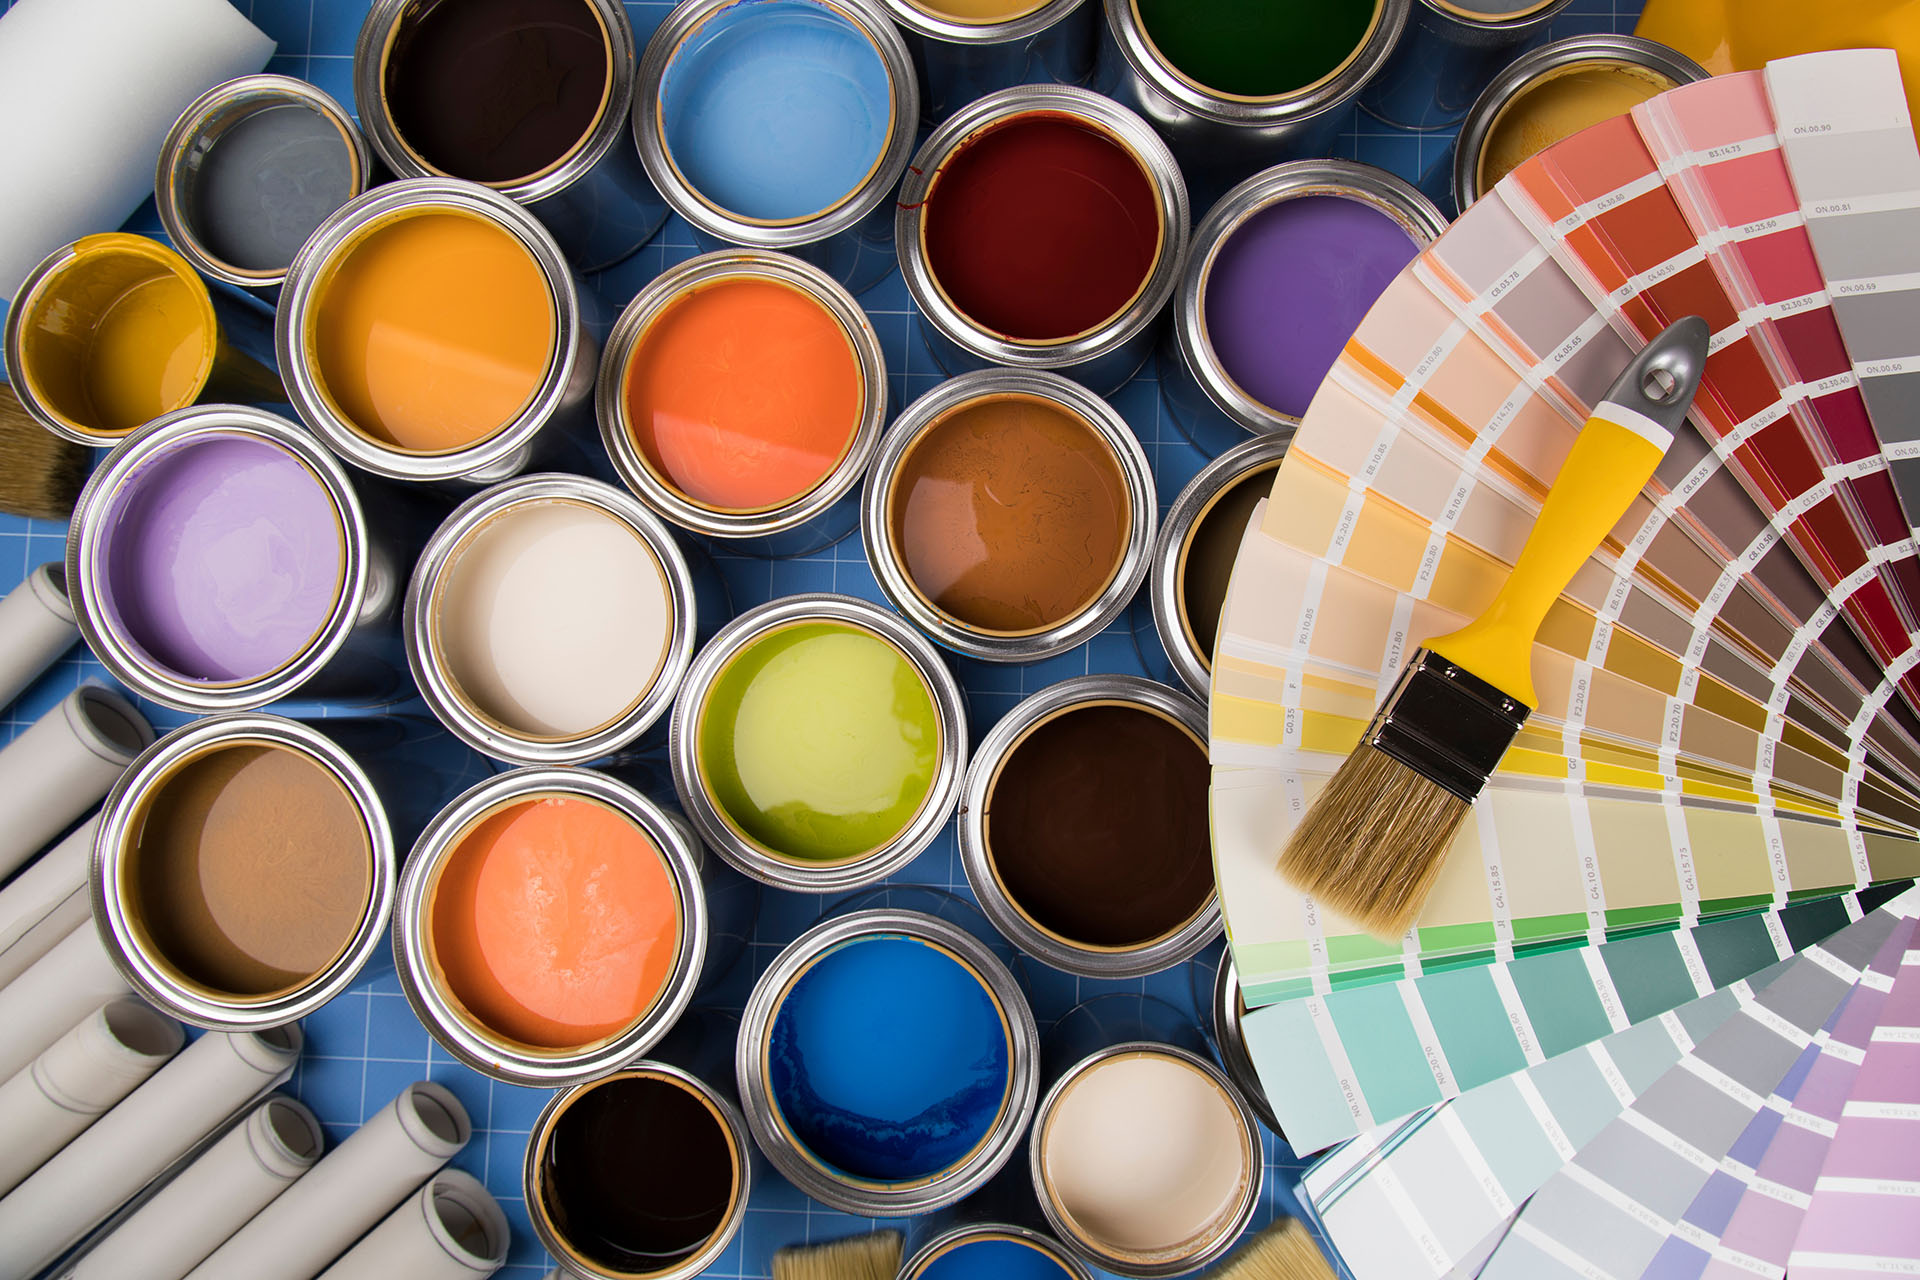 Get Peace of Mind with Somerset Painting: Hire a Painting Company with a Dedicated Project Manager